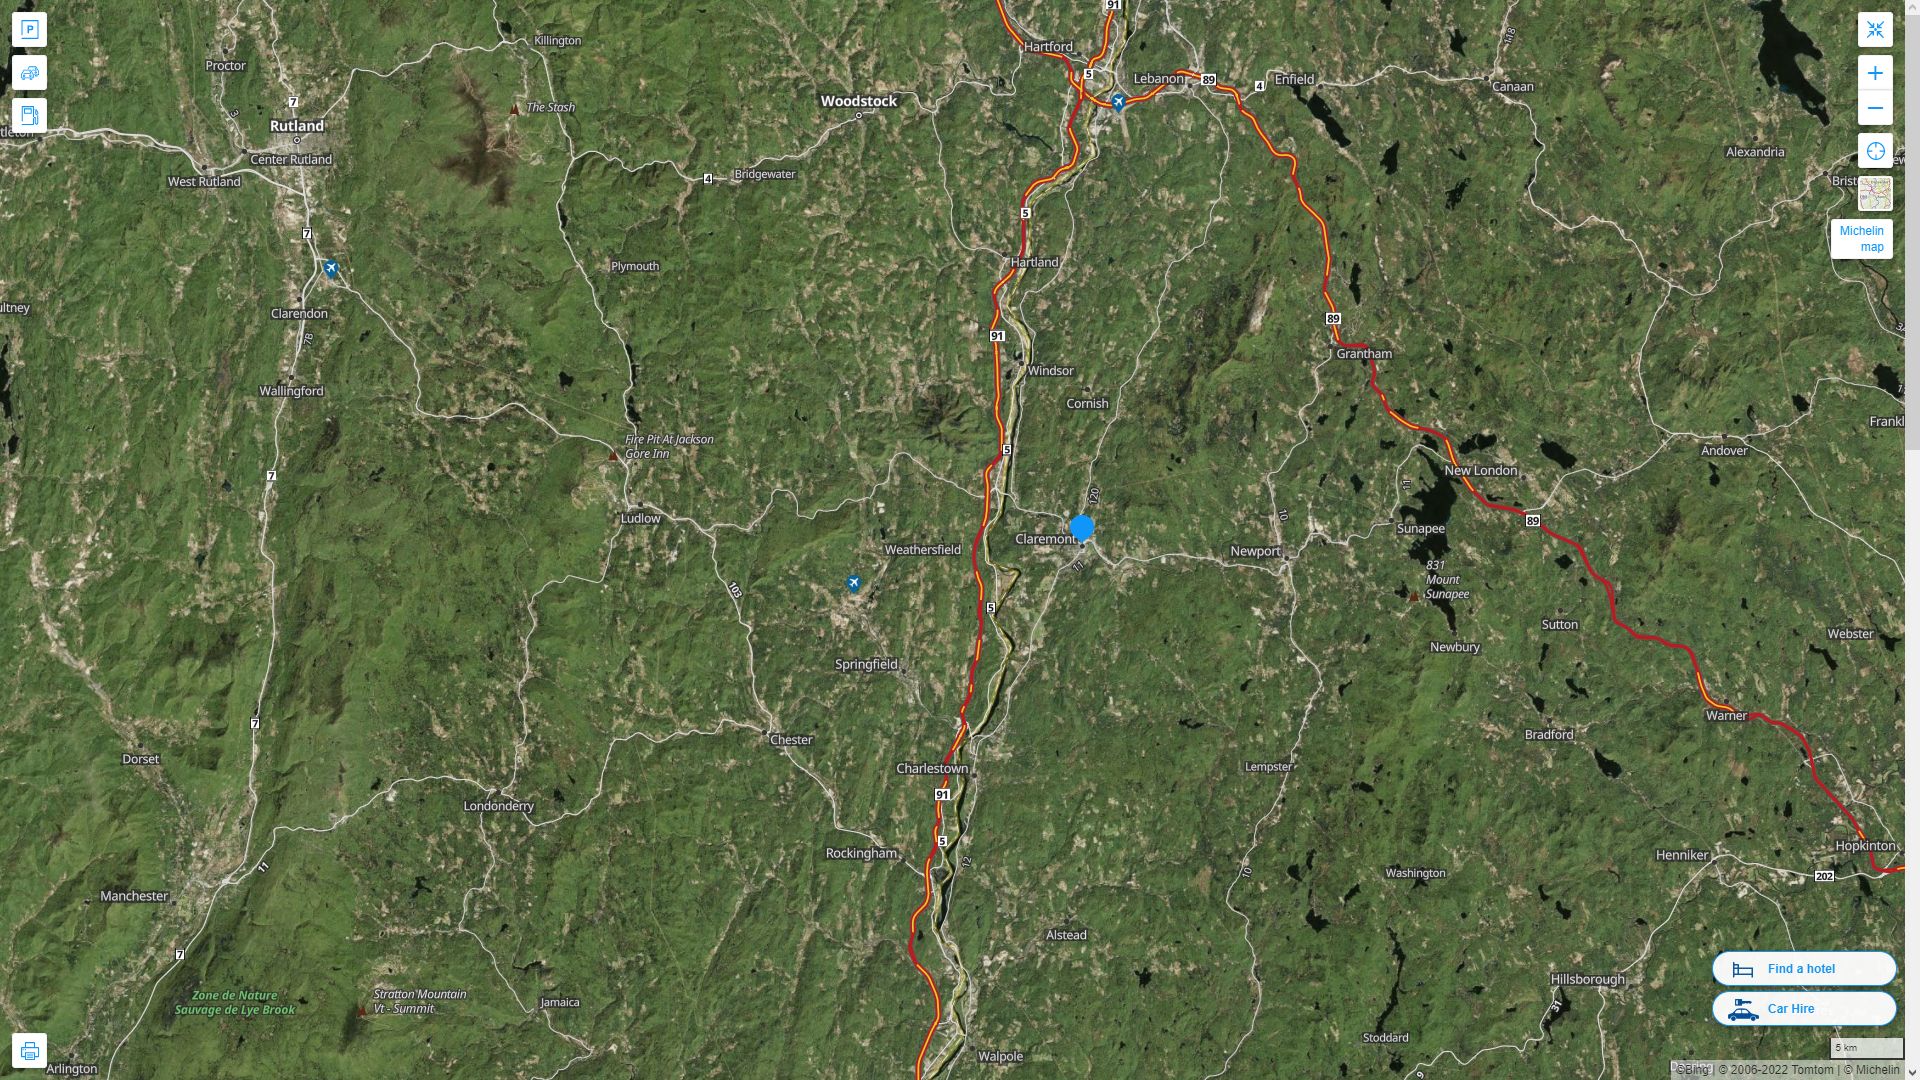 Claremont New Hampshire Highway and Road Map with Satellite View